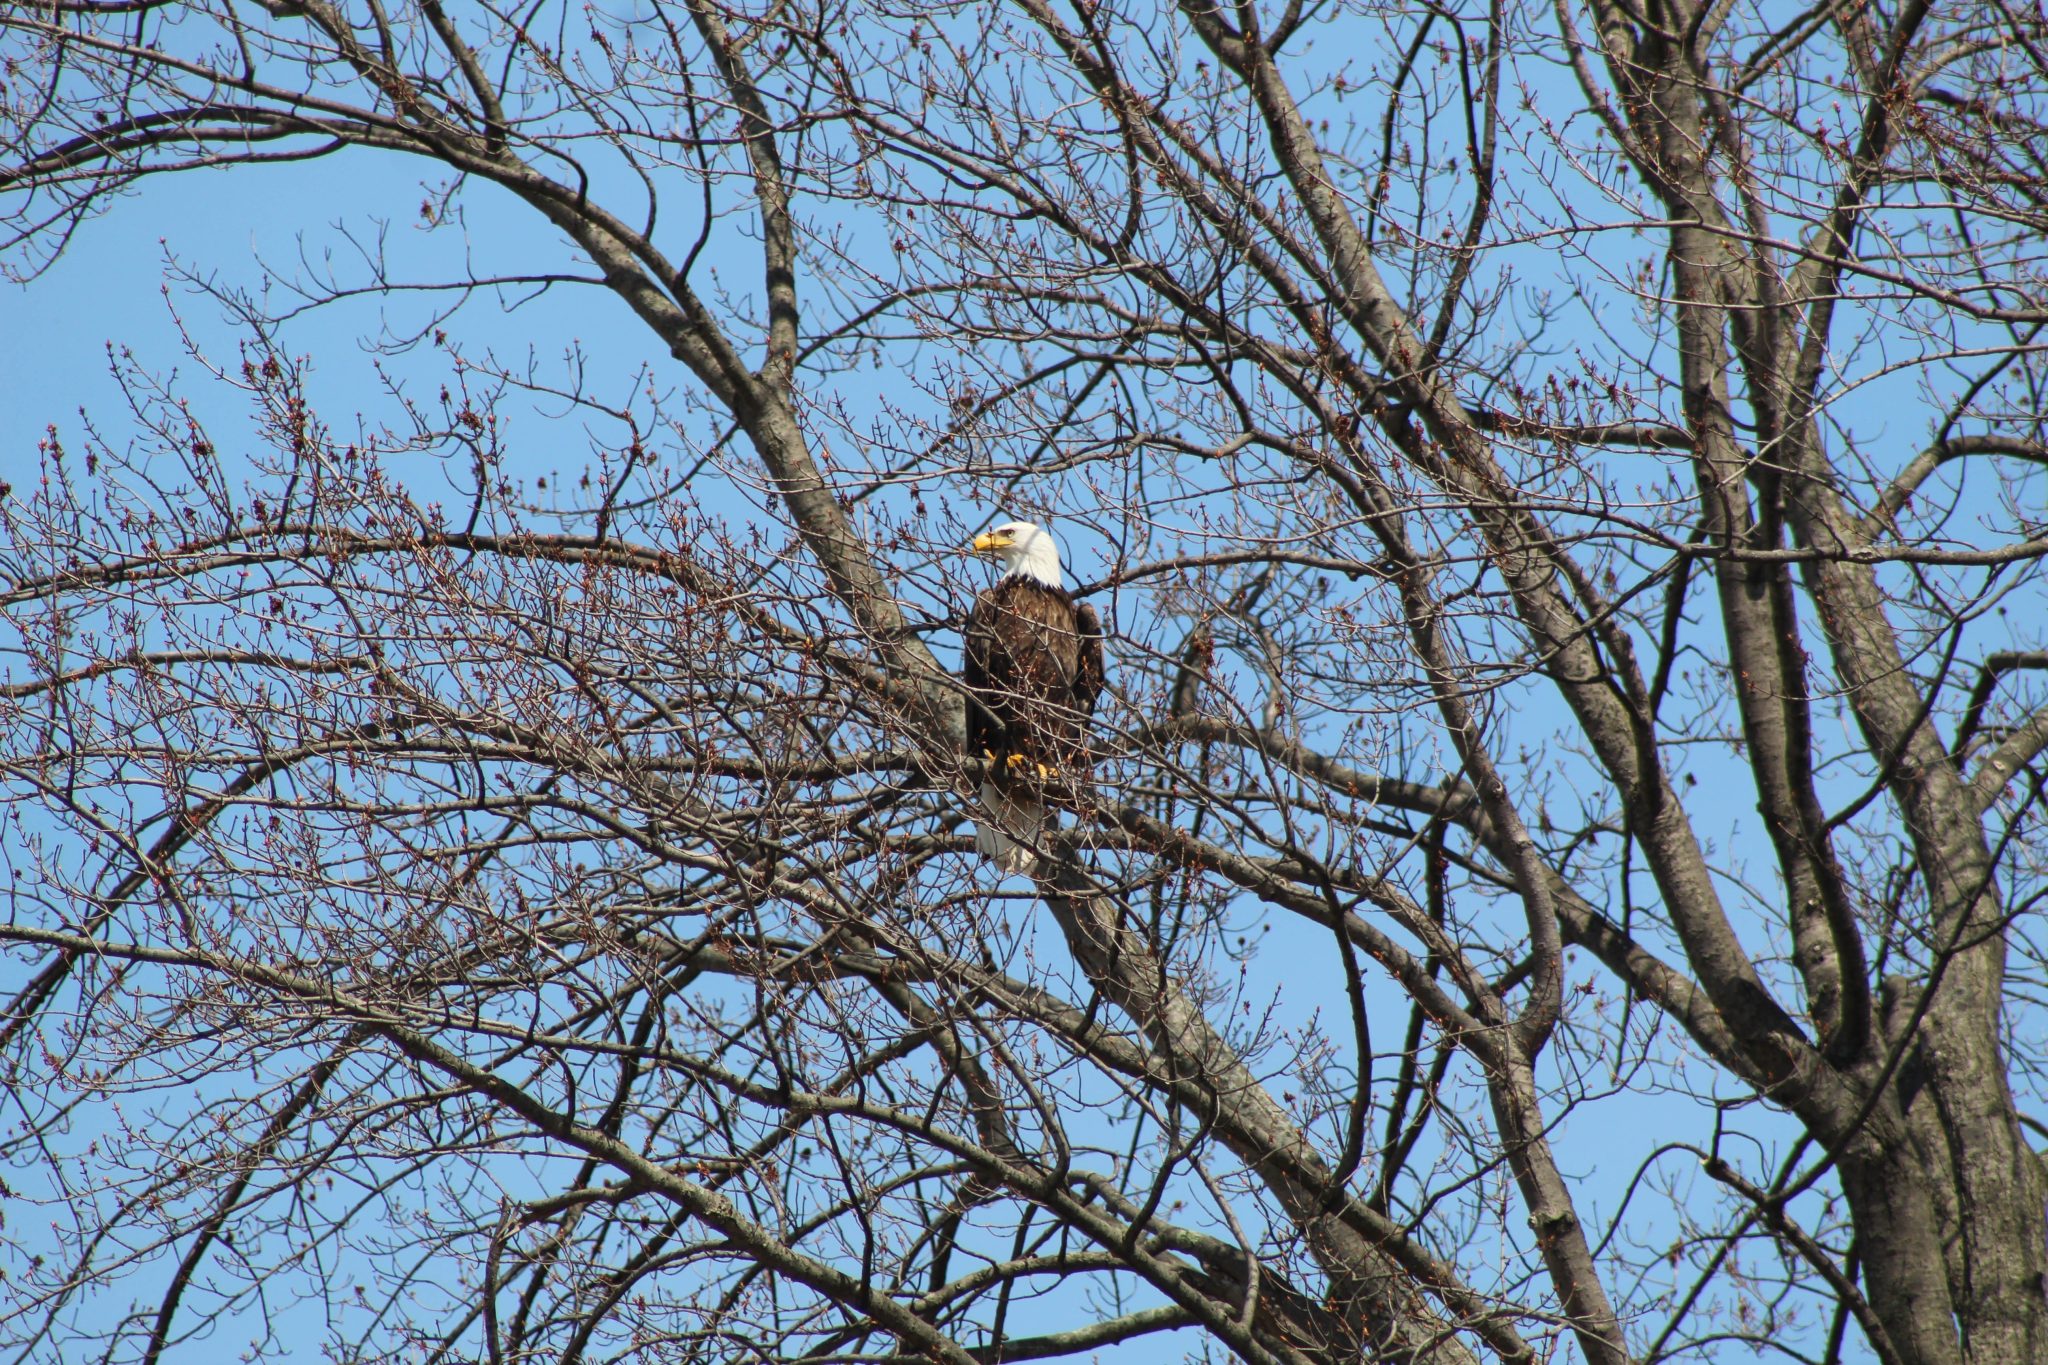 American Bald Eagle in tree with blue sky